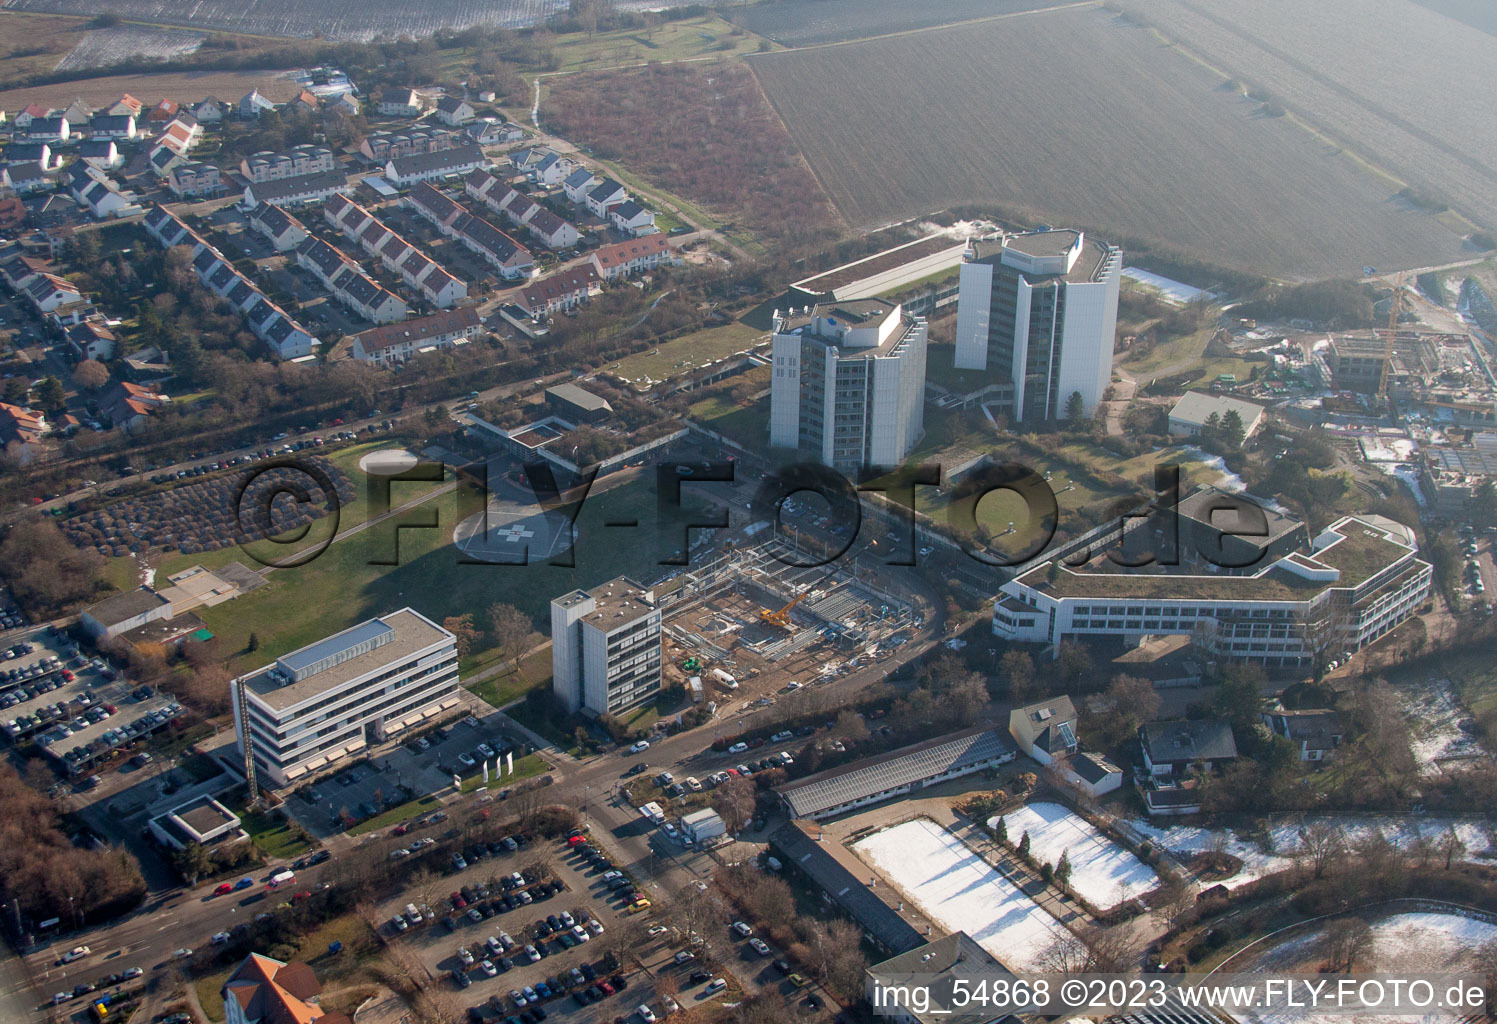 Aerial photograpy of Hospital grounds of the Clinic BG Klinik Ludwigshafen in Ludwigshafen am Rhein in the state Rhineland-Palatinate